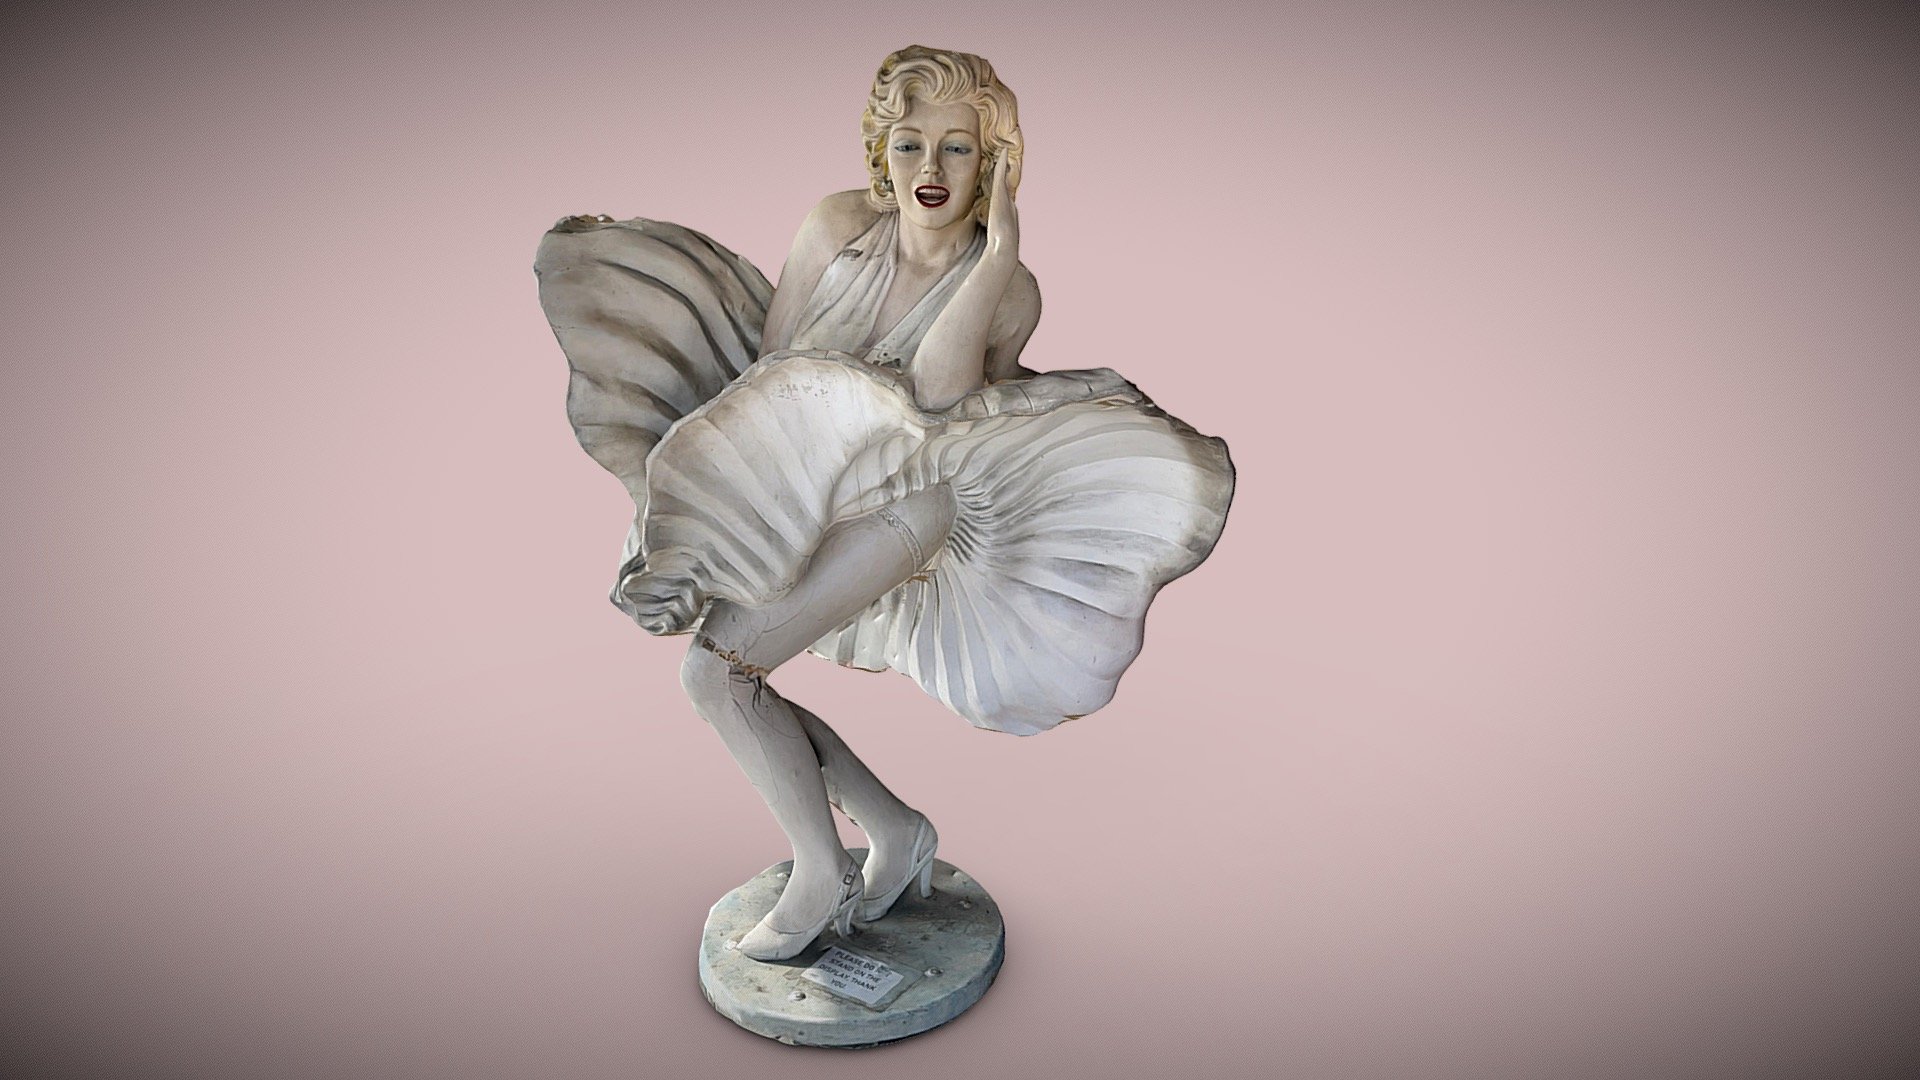 Quick scan of a Marilyn Monroe statue while at the Long Beach Pier.  Taken with the Trnio Plus Beta app 3d model